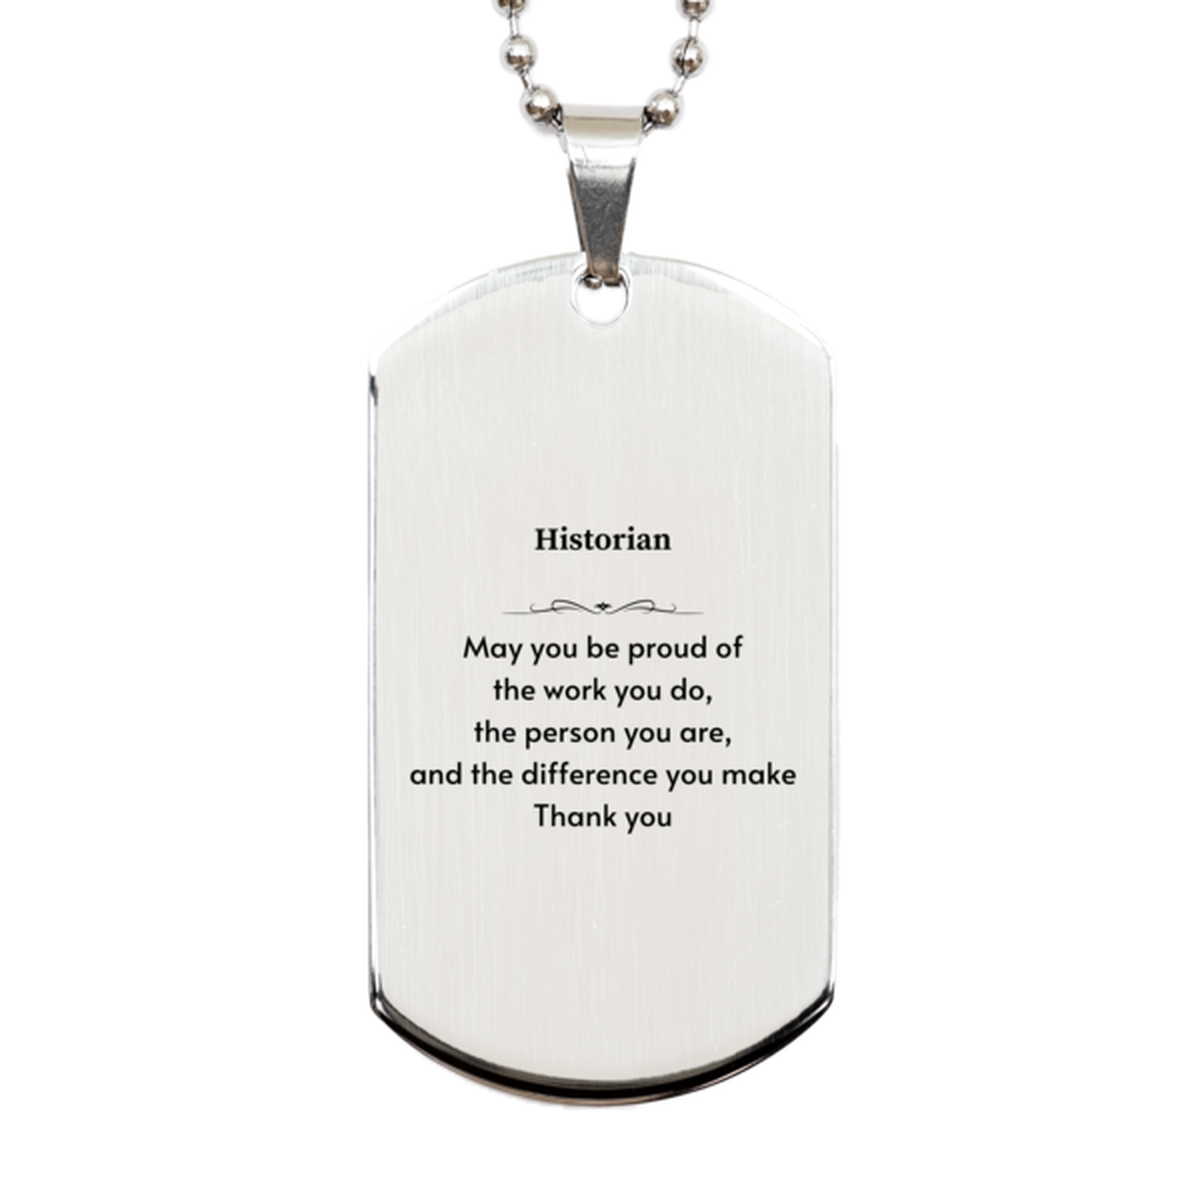 Heartwarming Silver Dog Tag Retirement Coworkers Gifts for Historian, Historian May You be proud of the work you do, the person you are Gifts for Boss Men Women Friends